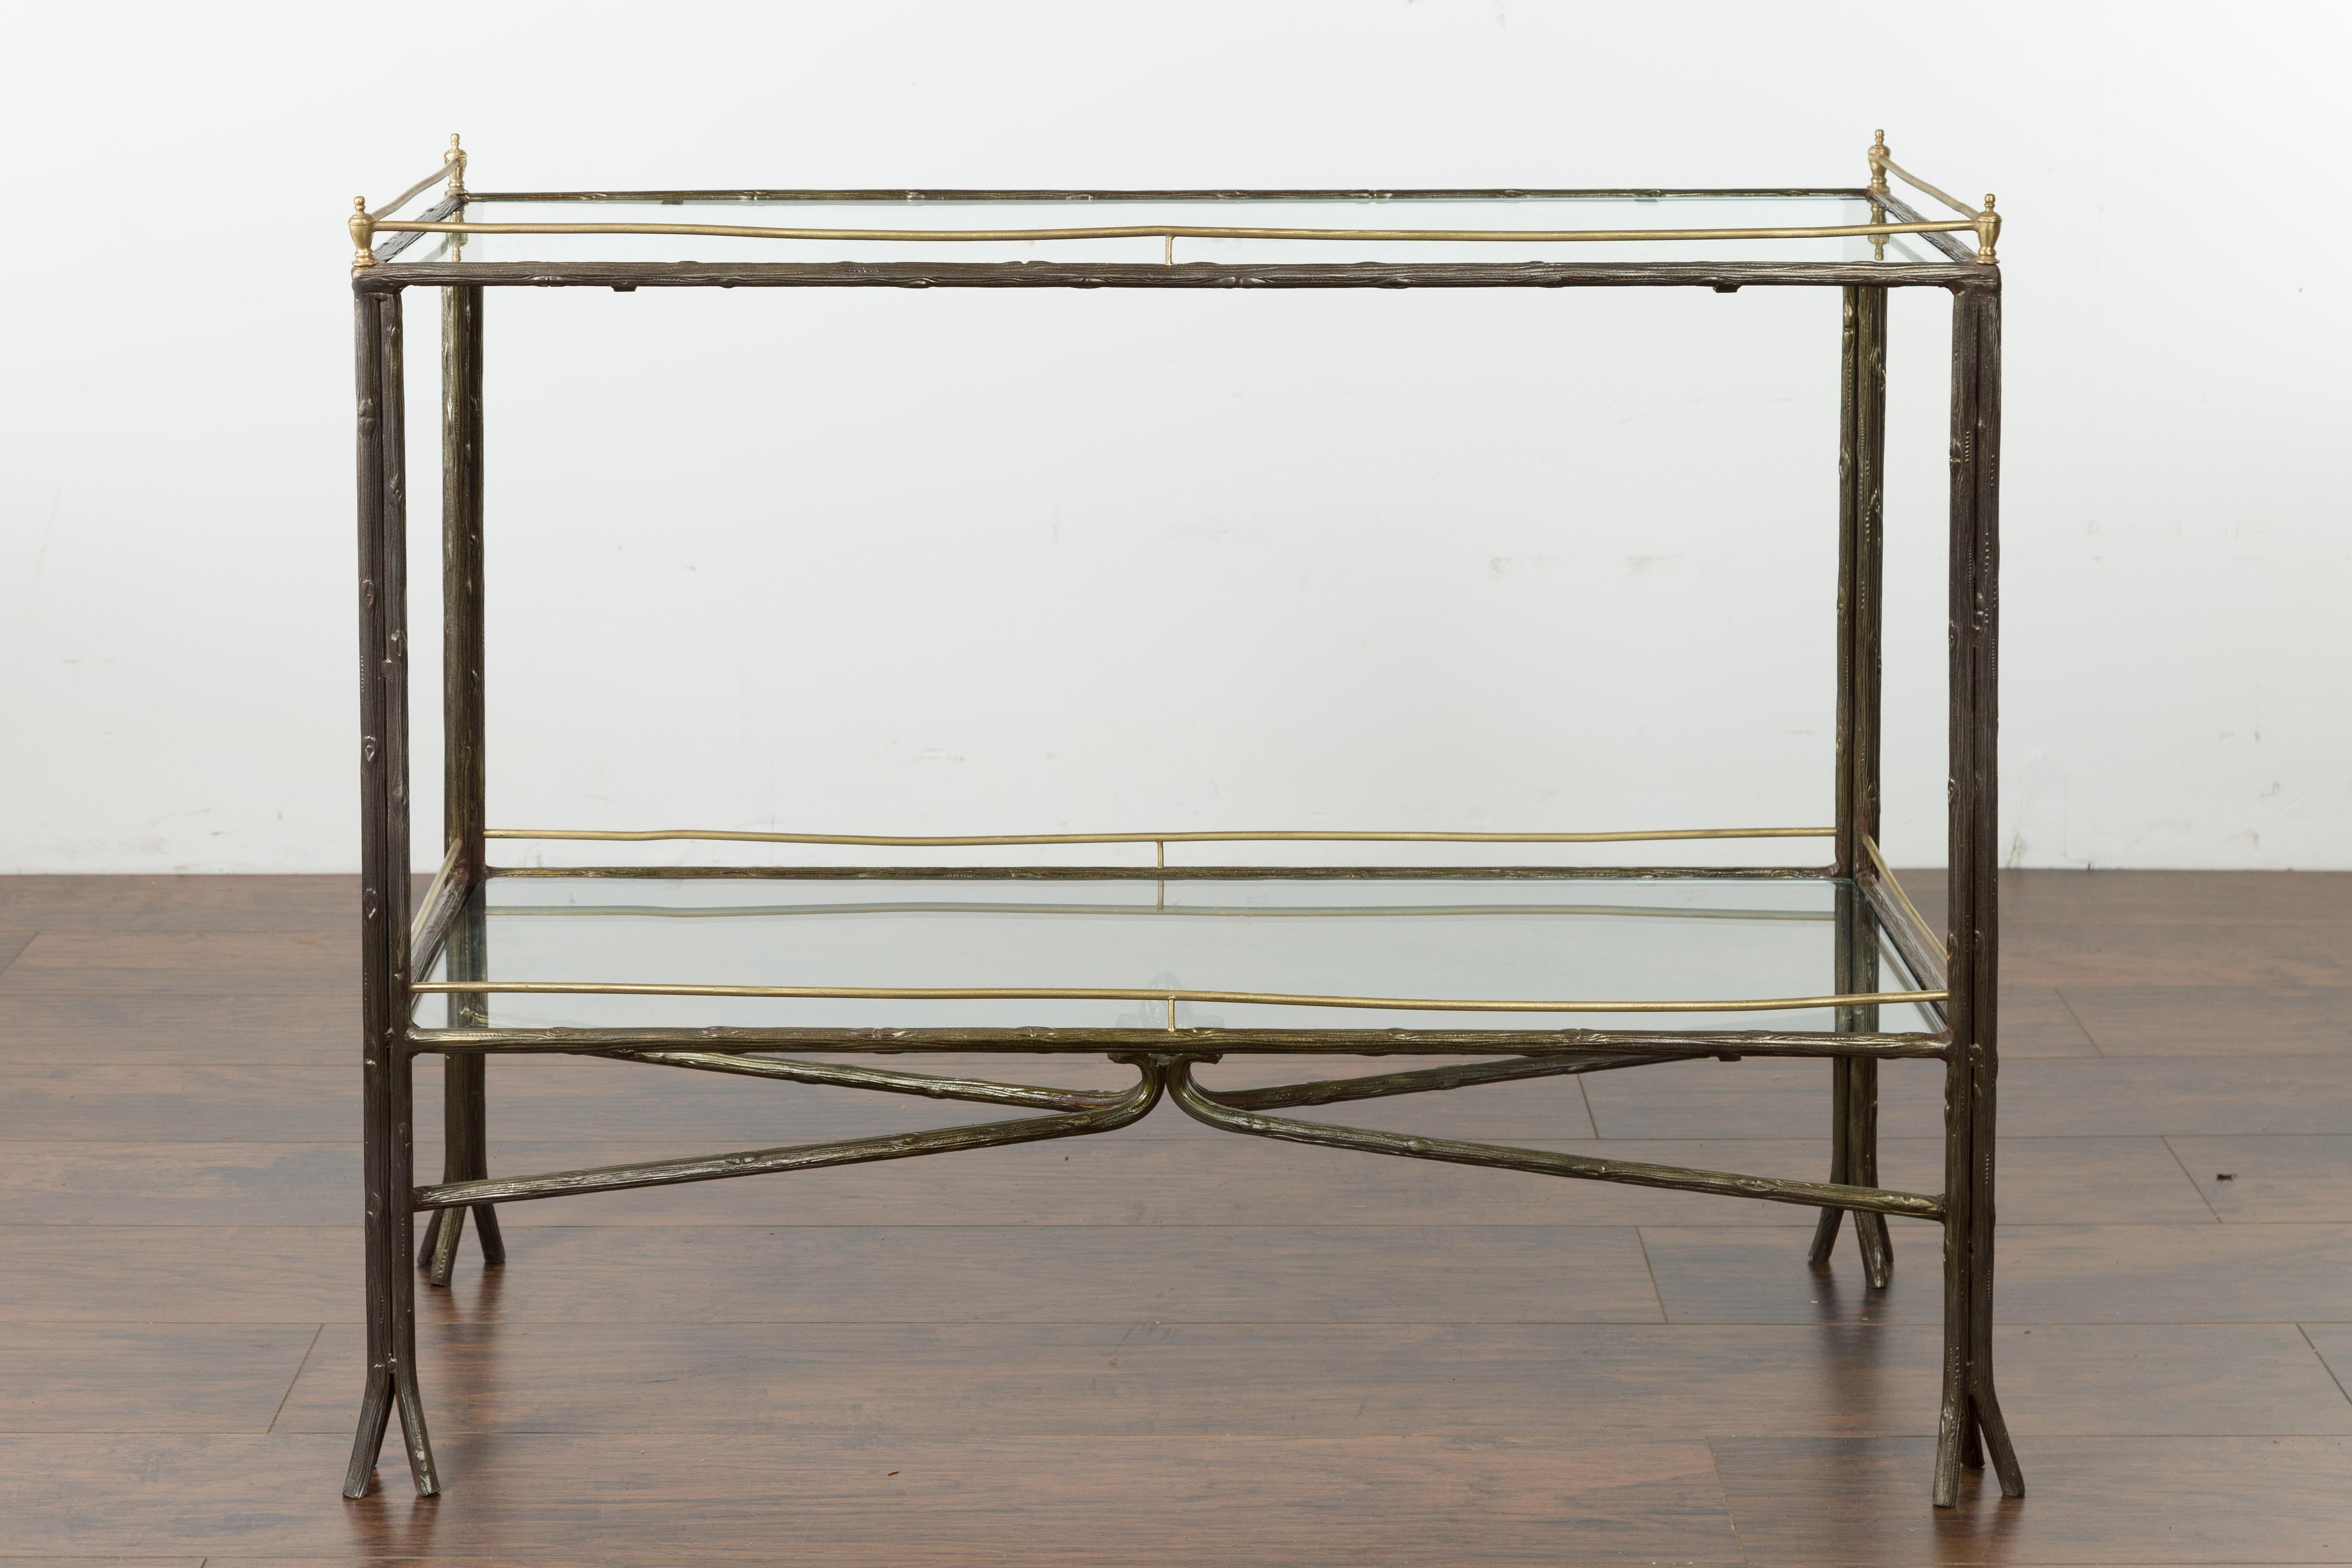 Midcentury Italian Steel and Brass Faux Bois Table with Glass Top and Shelf For Sale 12